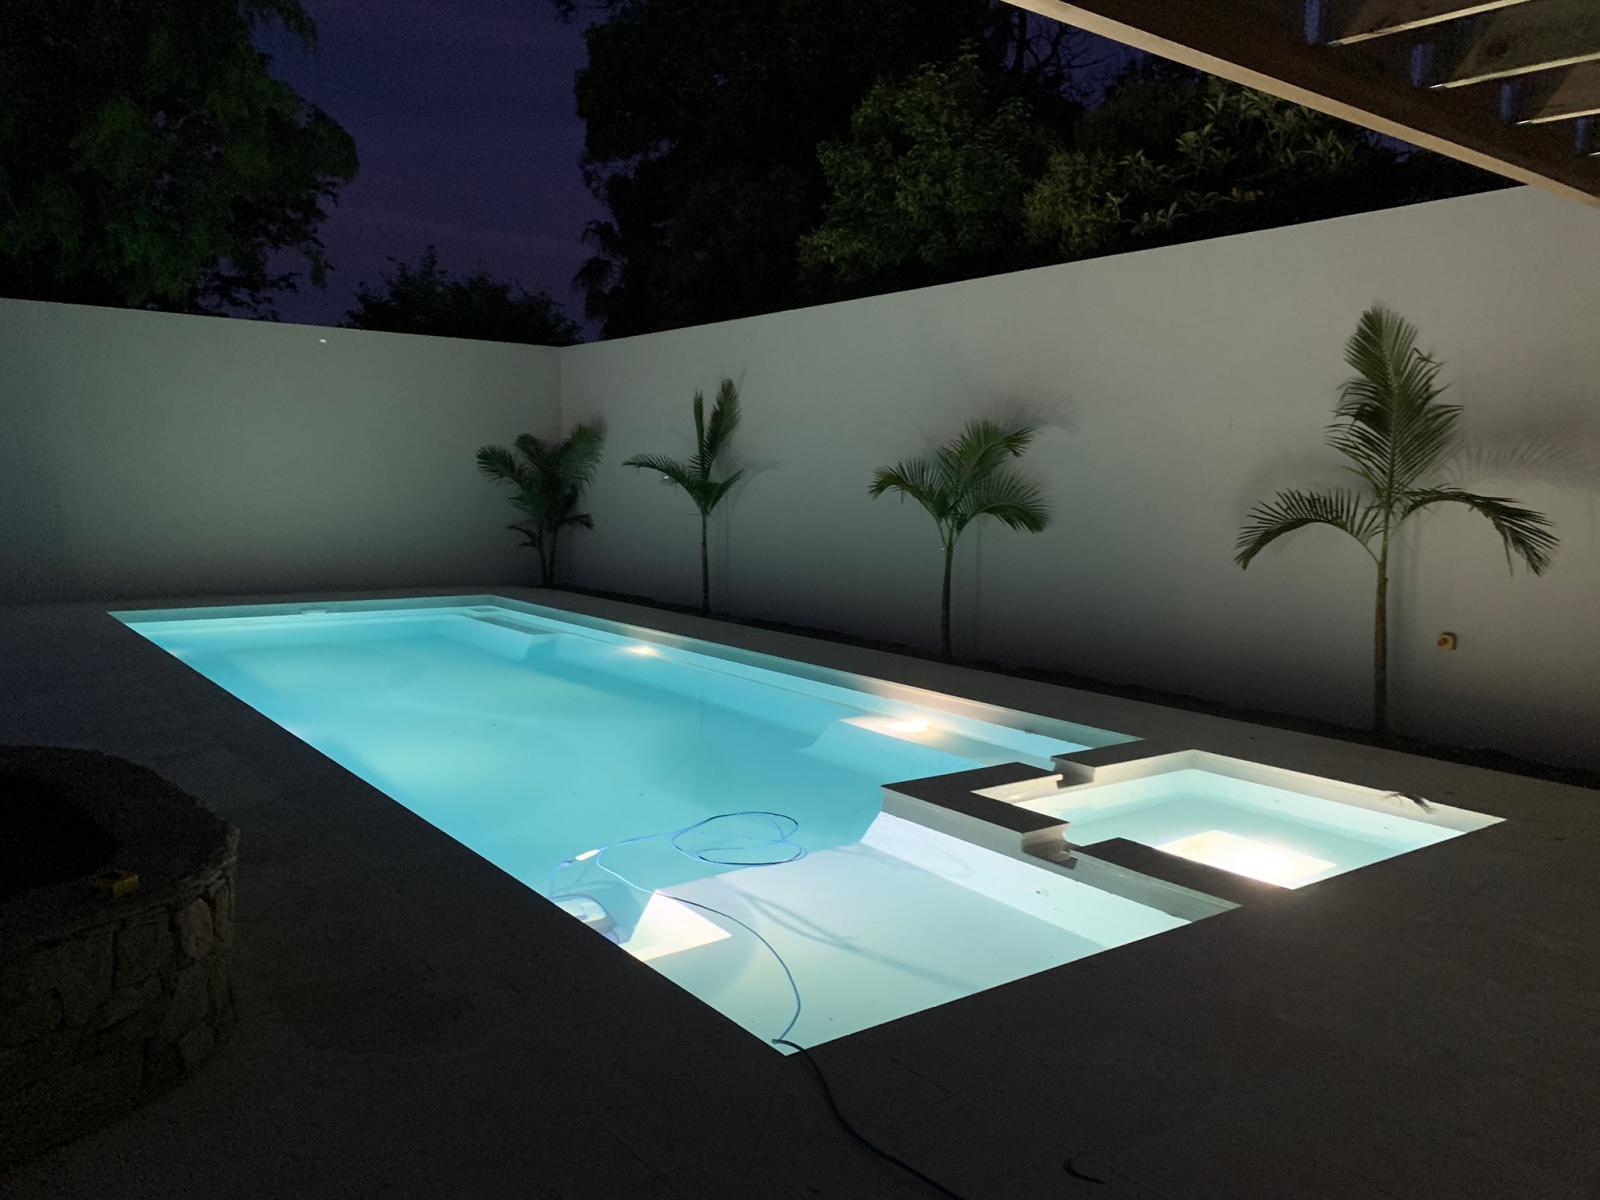 View Photo: Enhancements such as: underwater lighting for night swimming